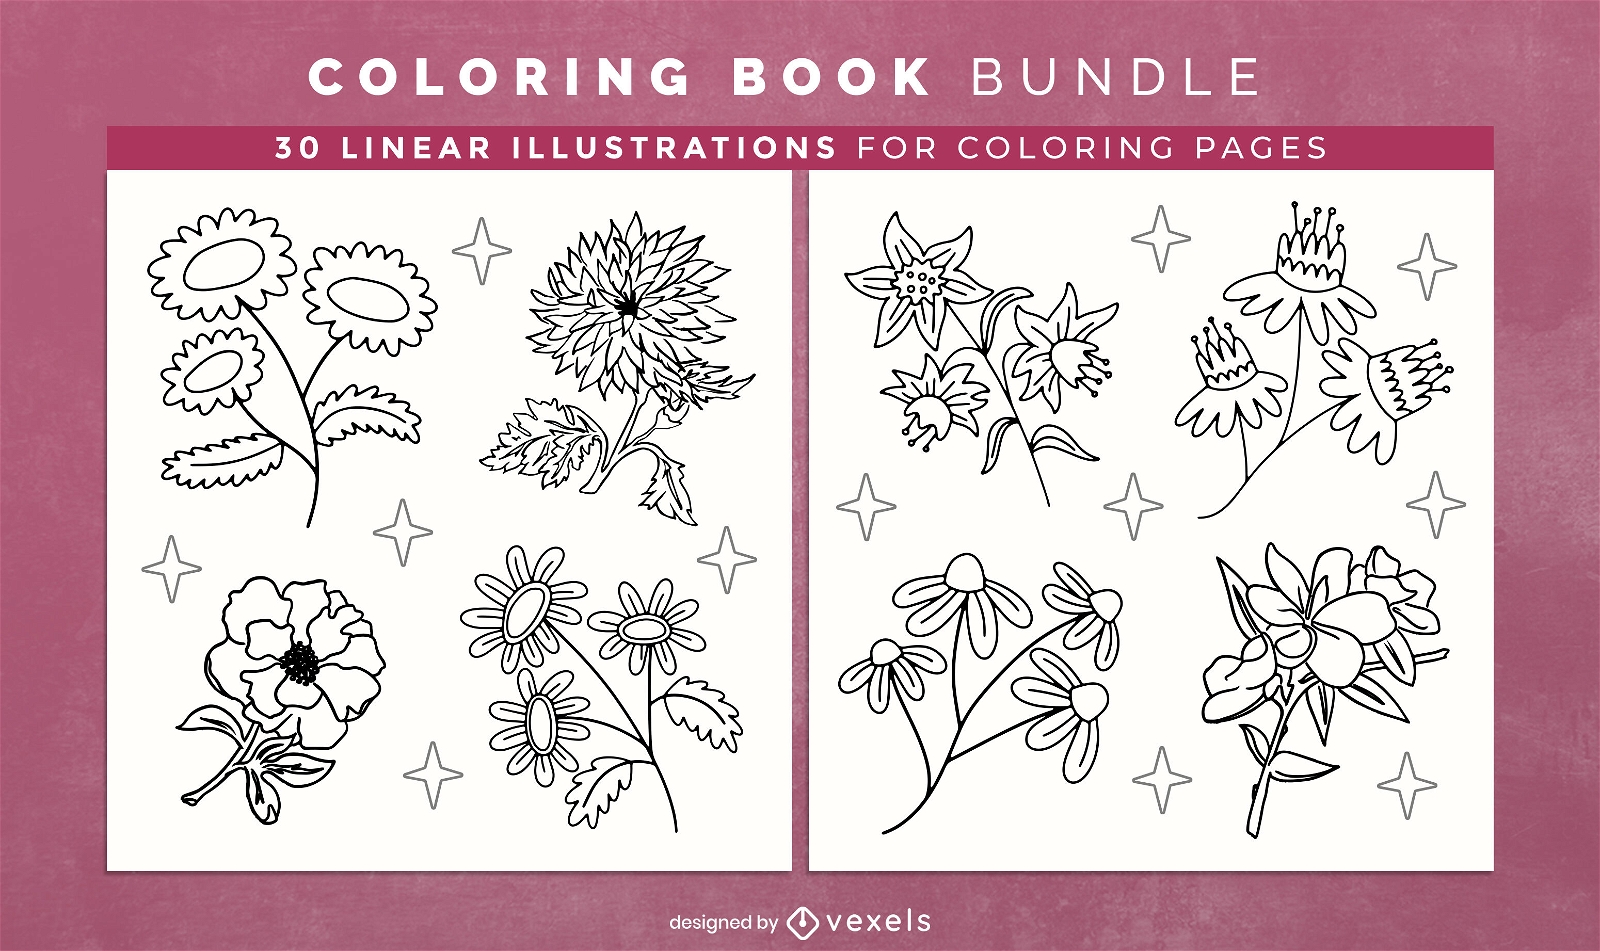 Types of flowers coloring book pages design